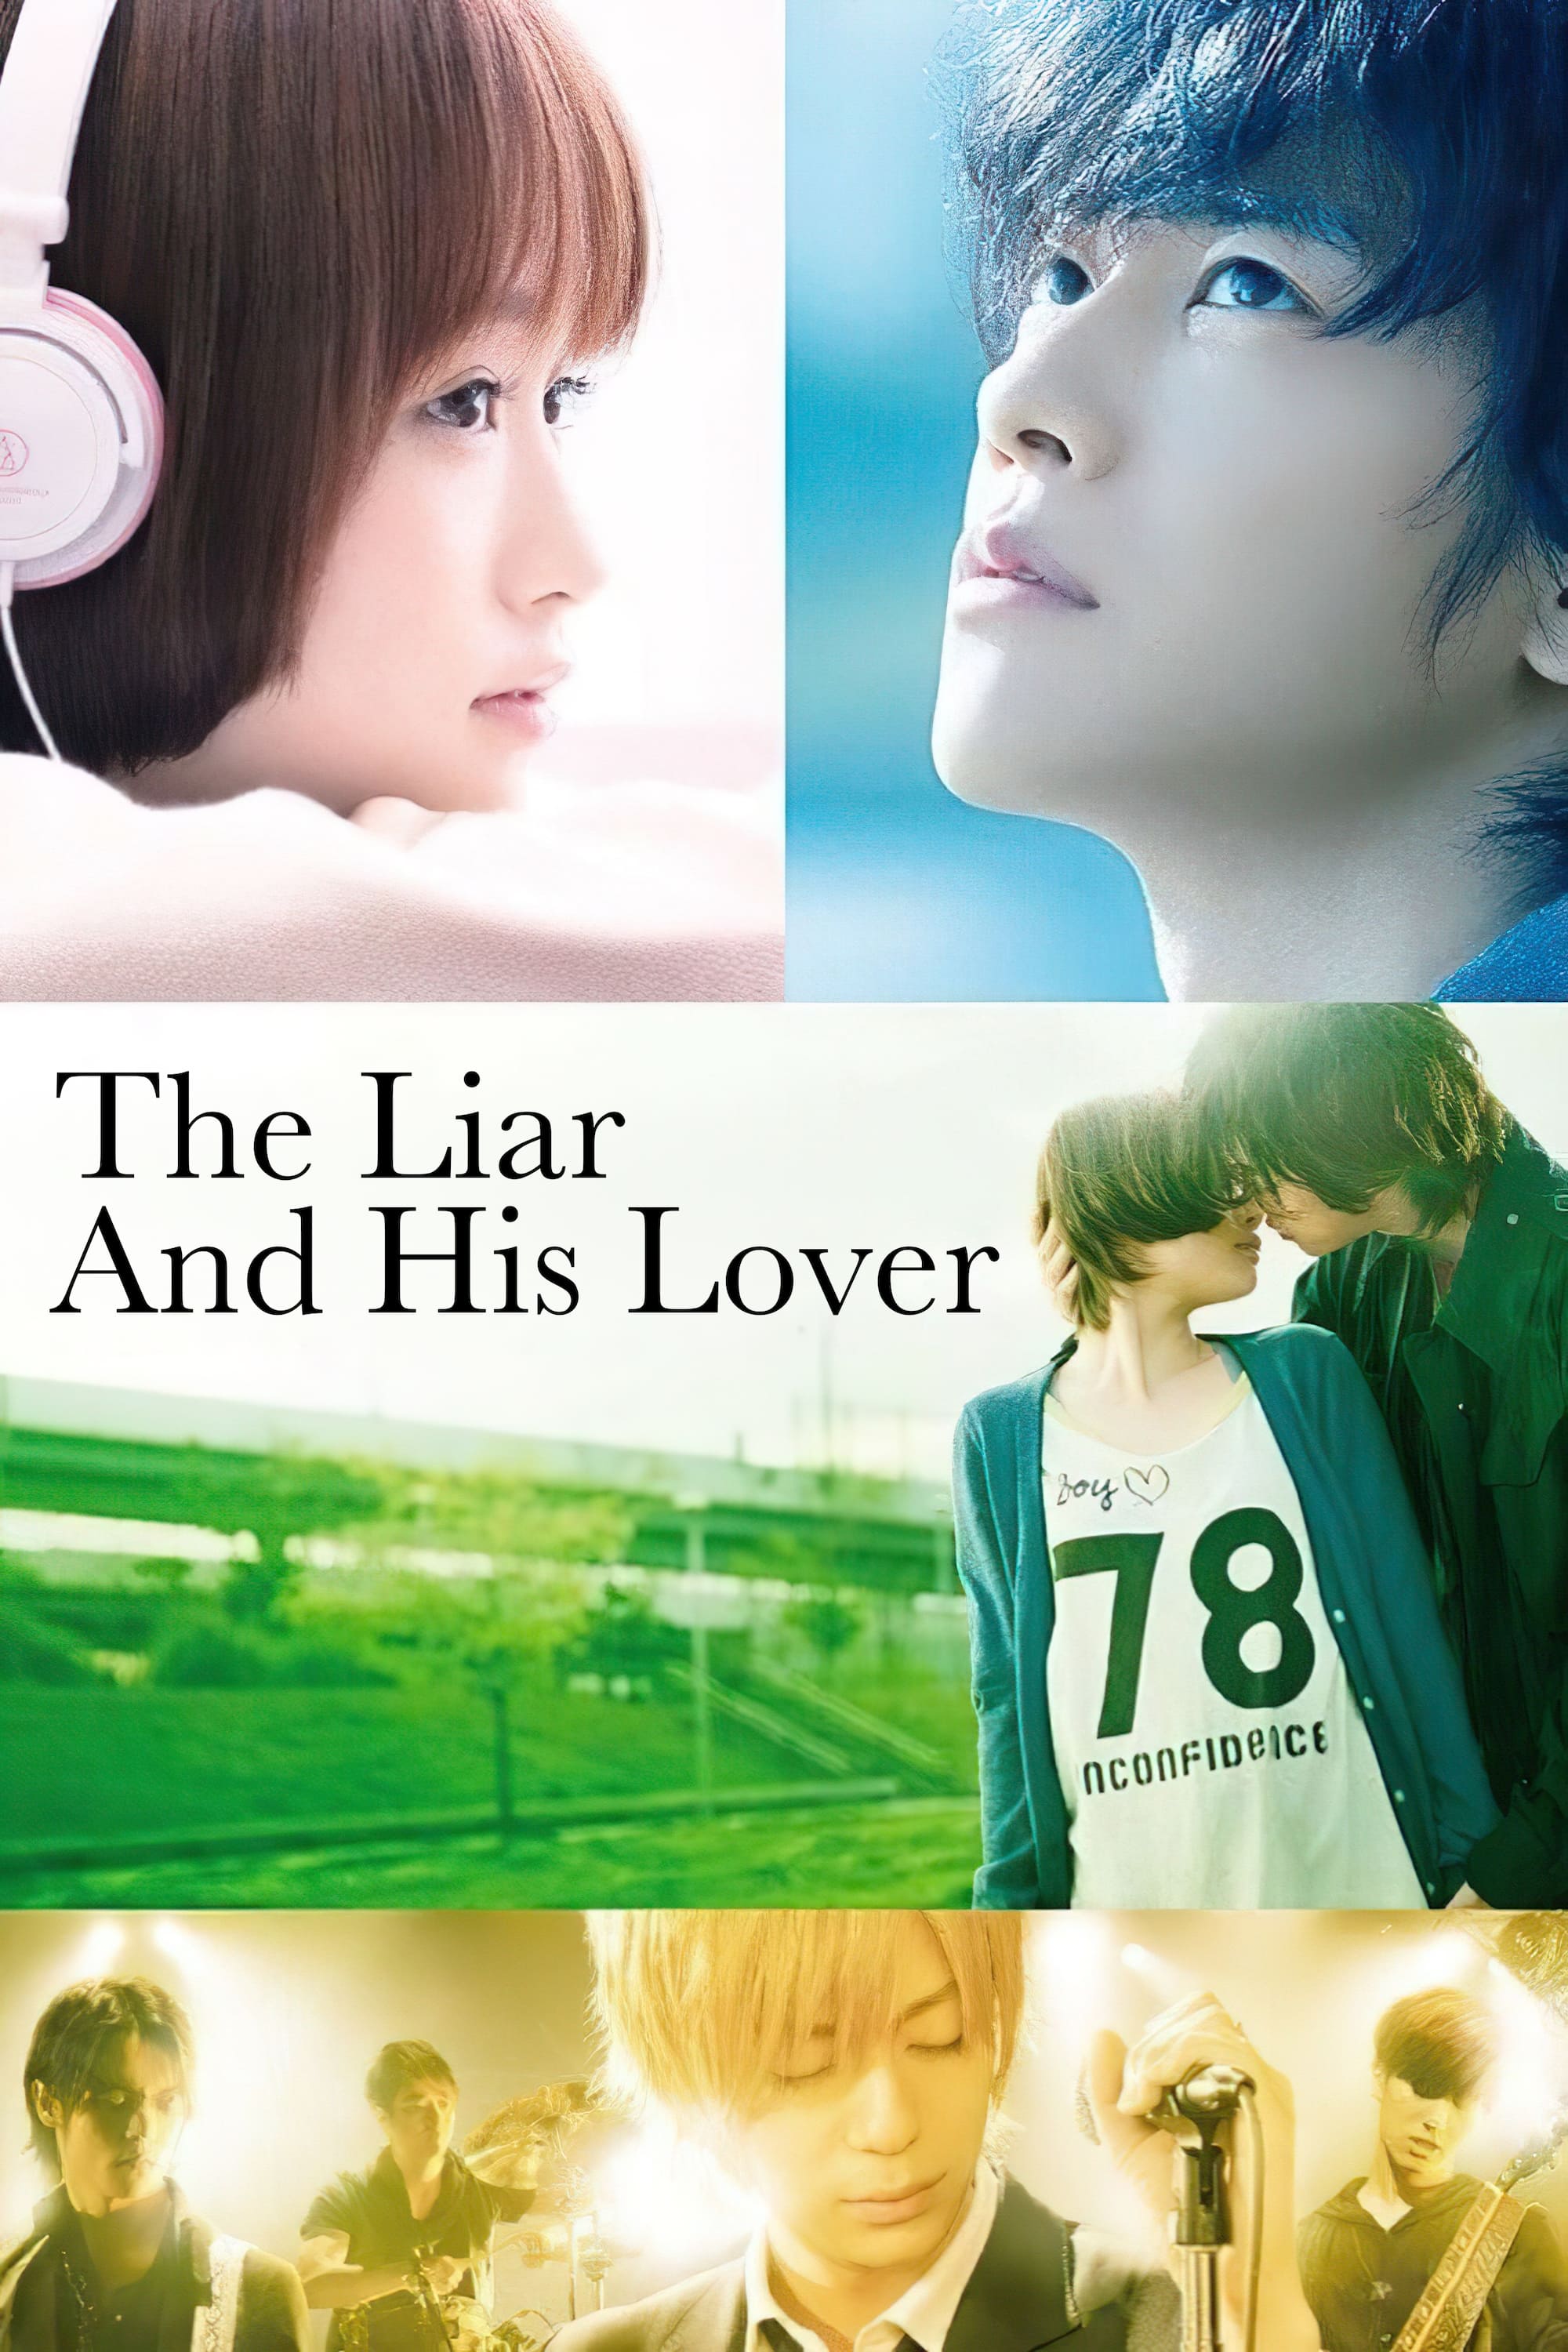 The Liar and His Lover (2013)